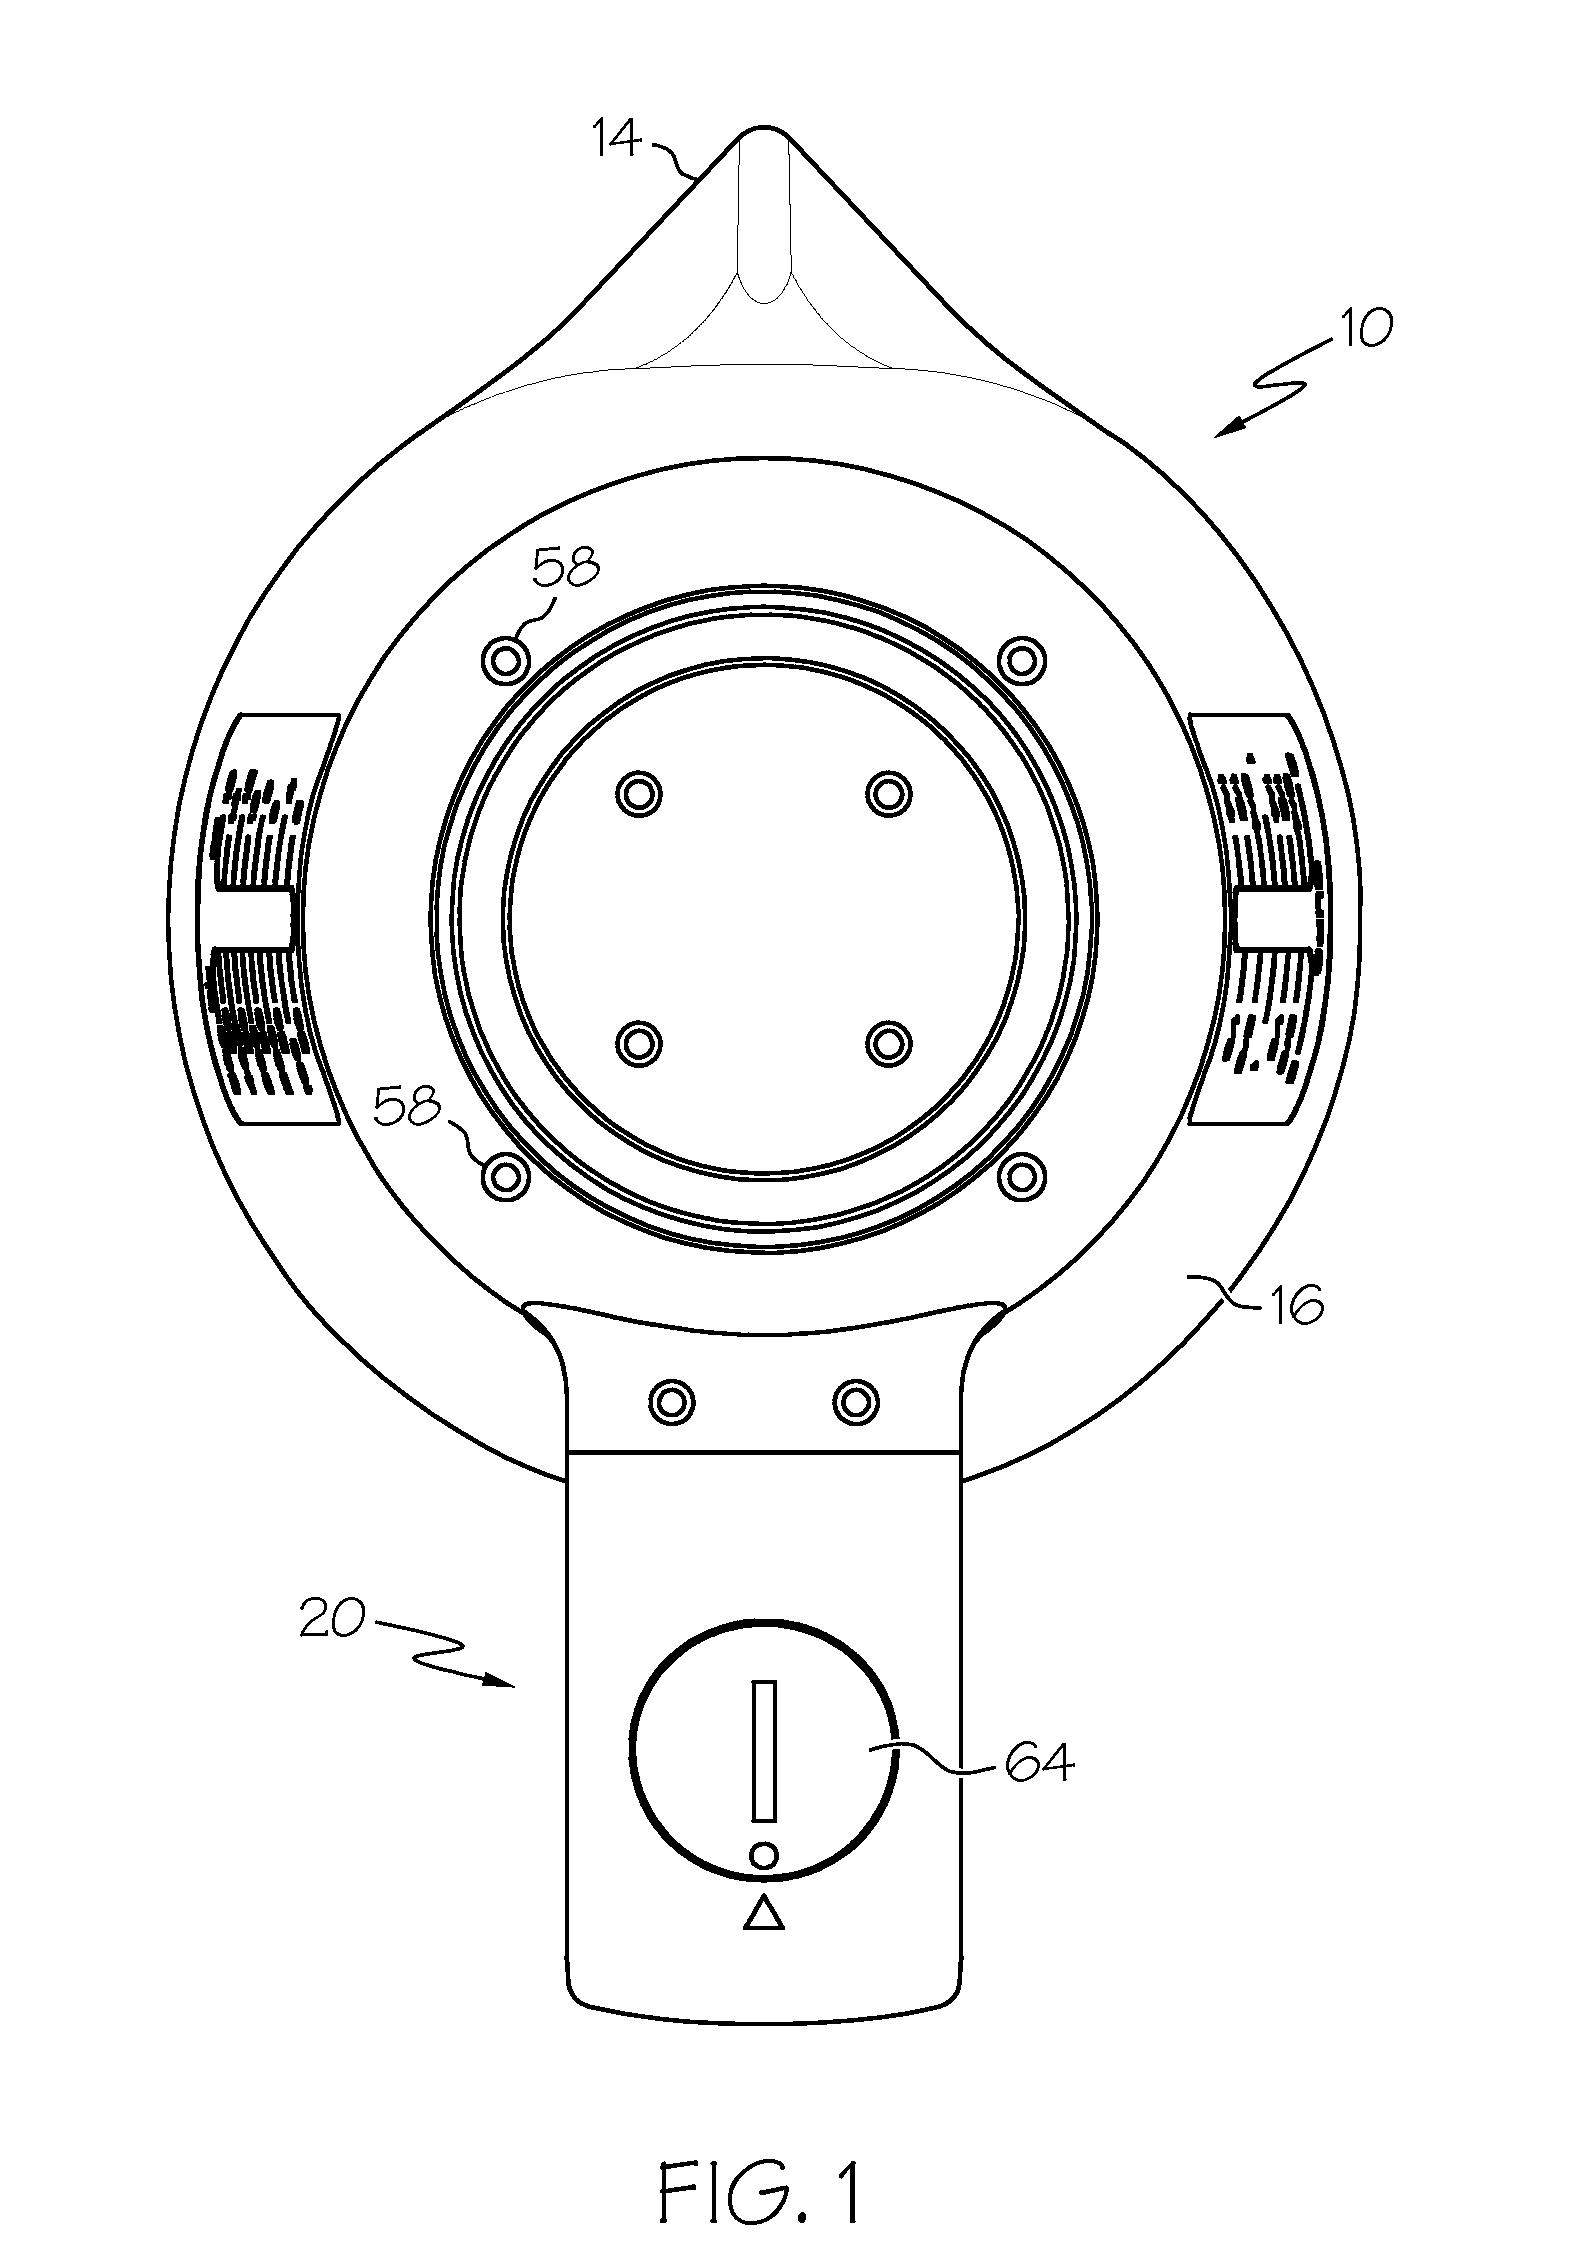 Food product measuring vessel with integrated scale